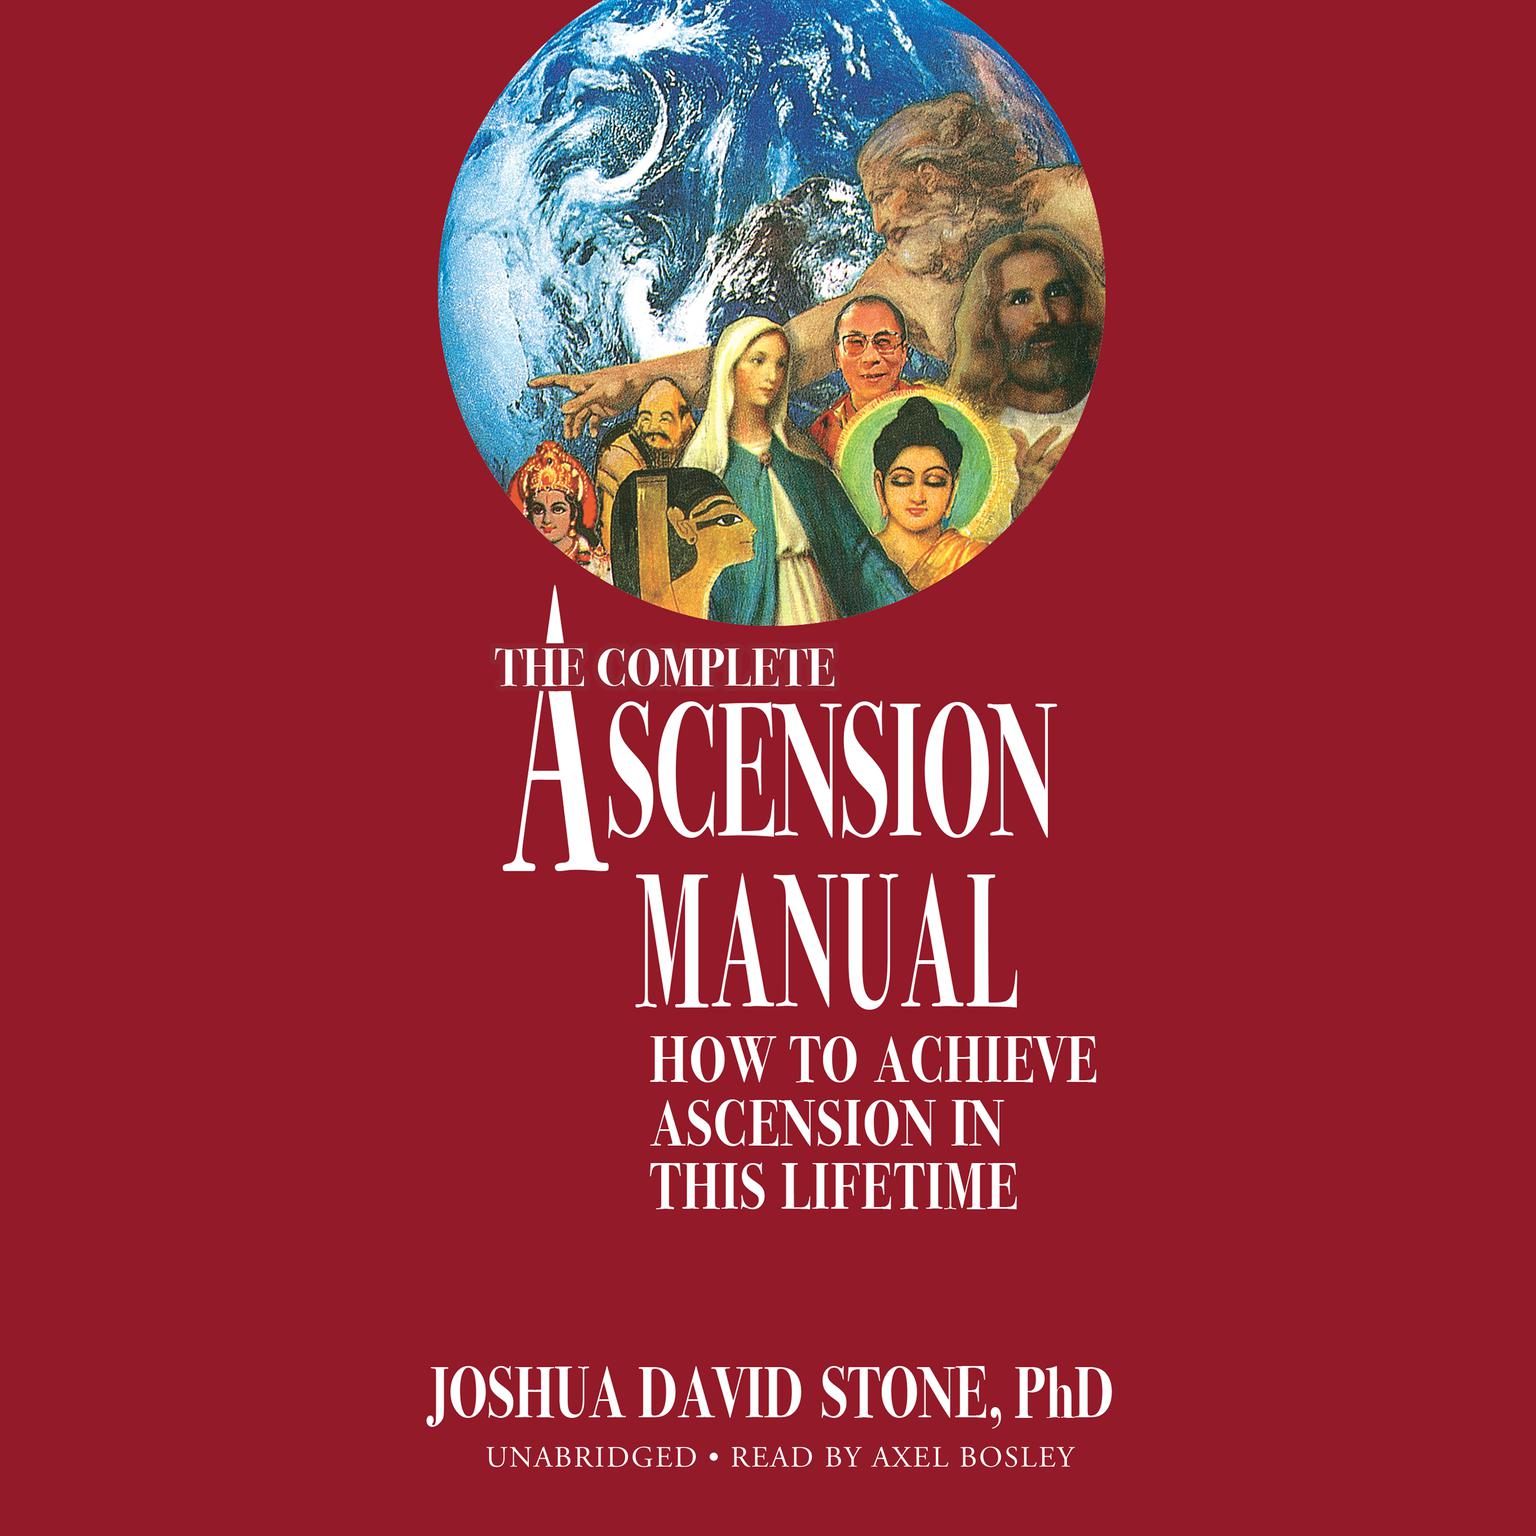 The Complete Ascension Manual: How to Achieve Ascension in This Lifetime Audiobook, by Joshua David Stone